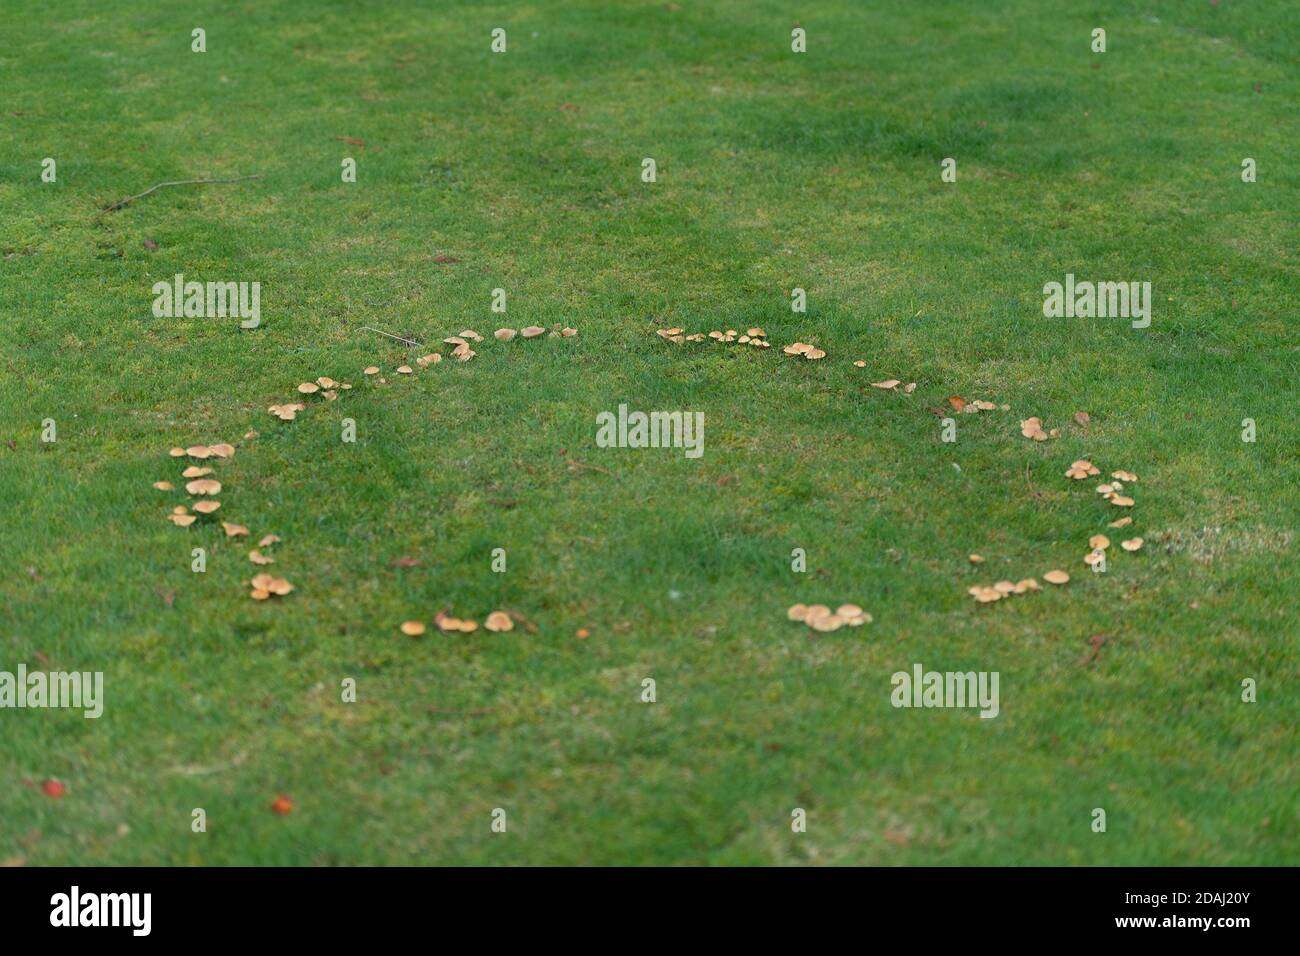 fairy ring on lawn Stock Photo